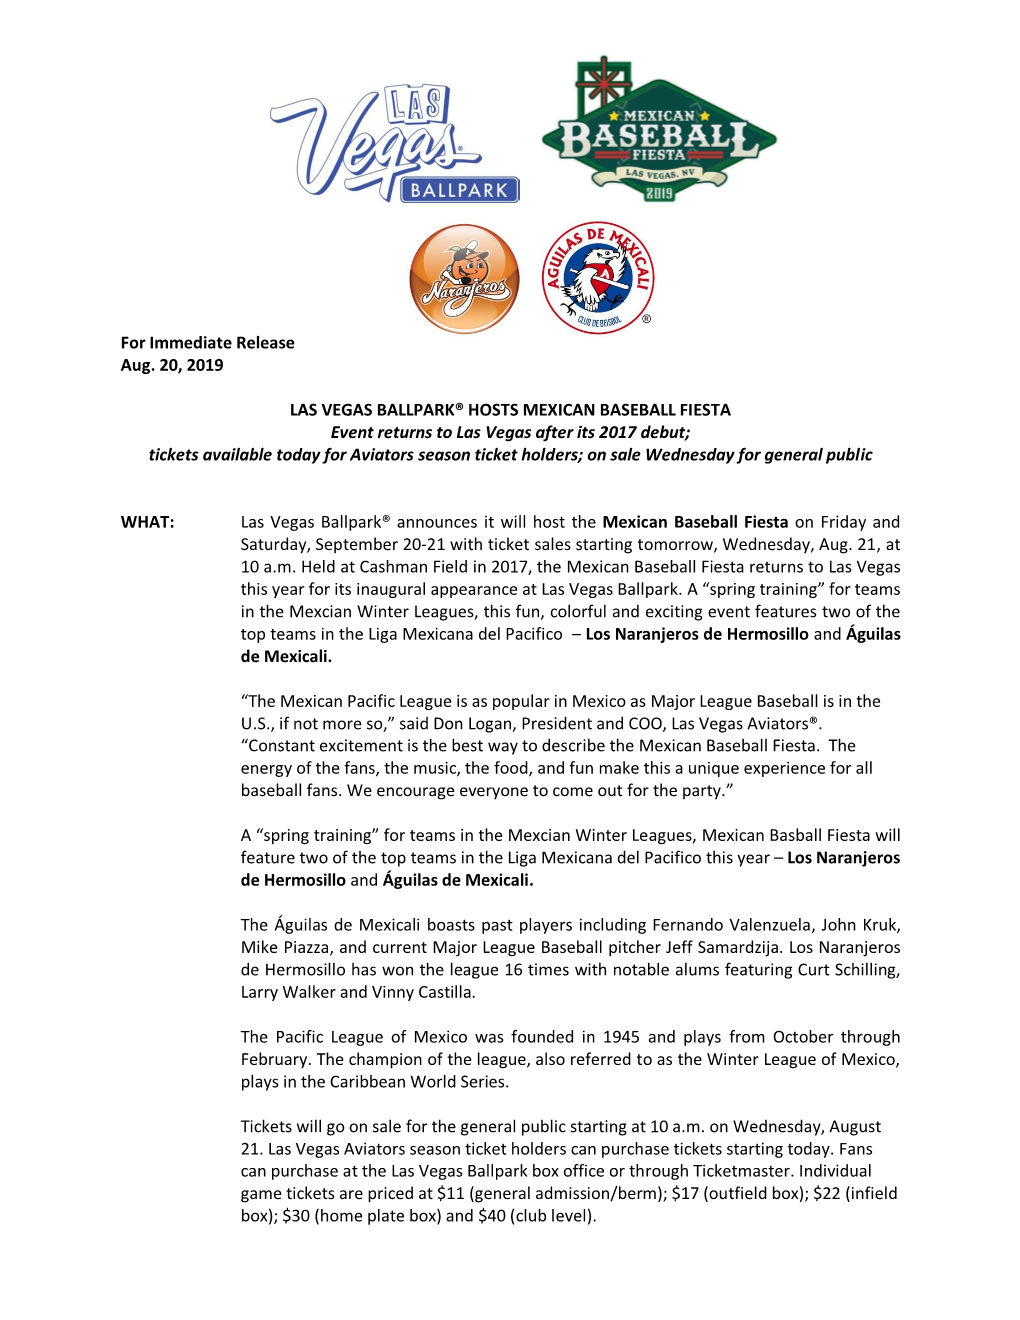 For Immediate Release Aug. 20, 2019 LAS VEGAS BALLPARK® HOSTS MEXICAN BASEBALL FIESTA Event Returns to Las Vegas After Its 20